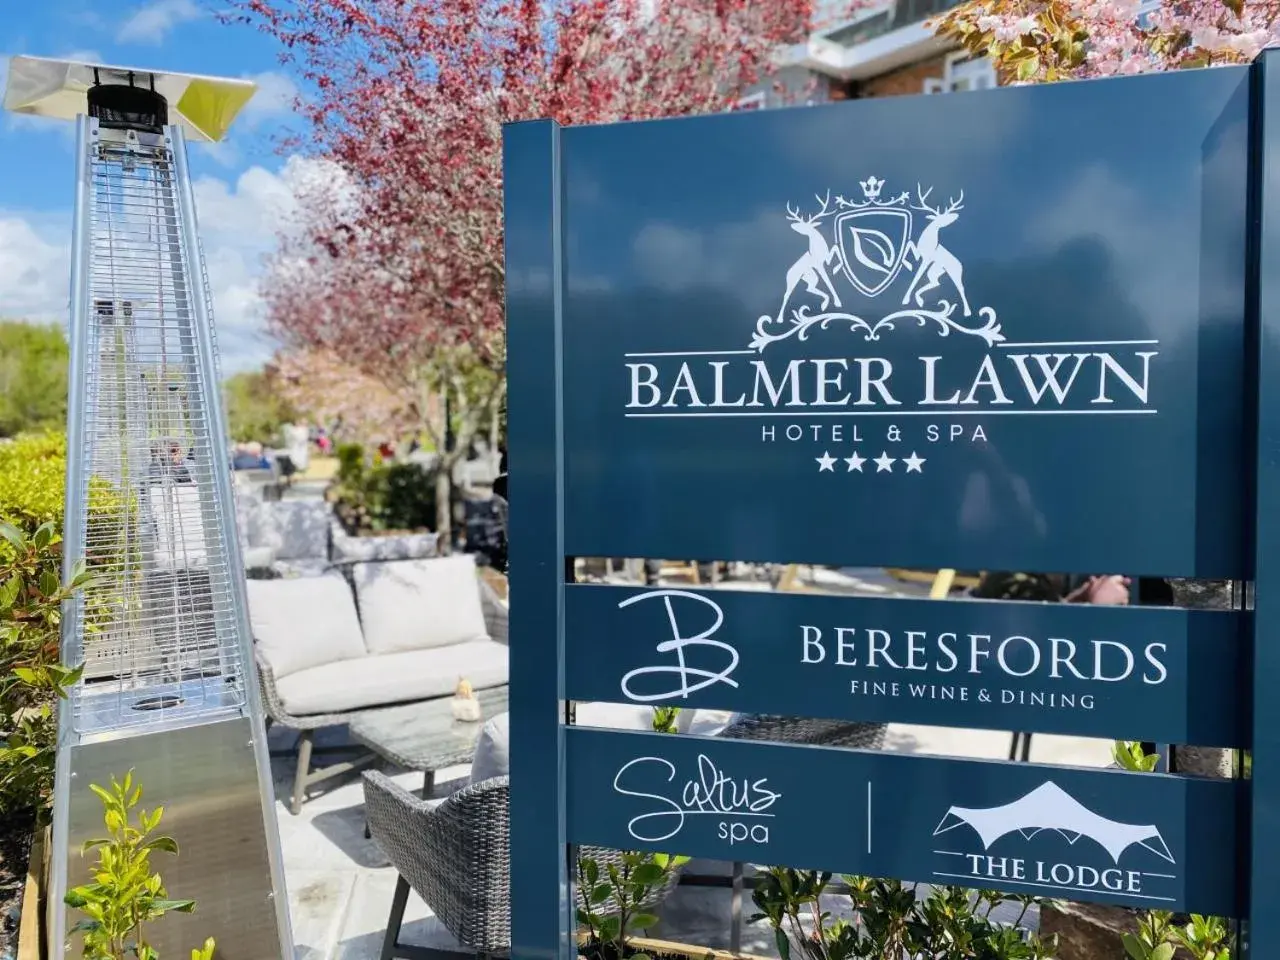 Property logo or sign in Balmer Lawn